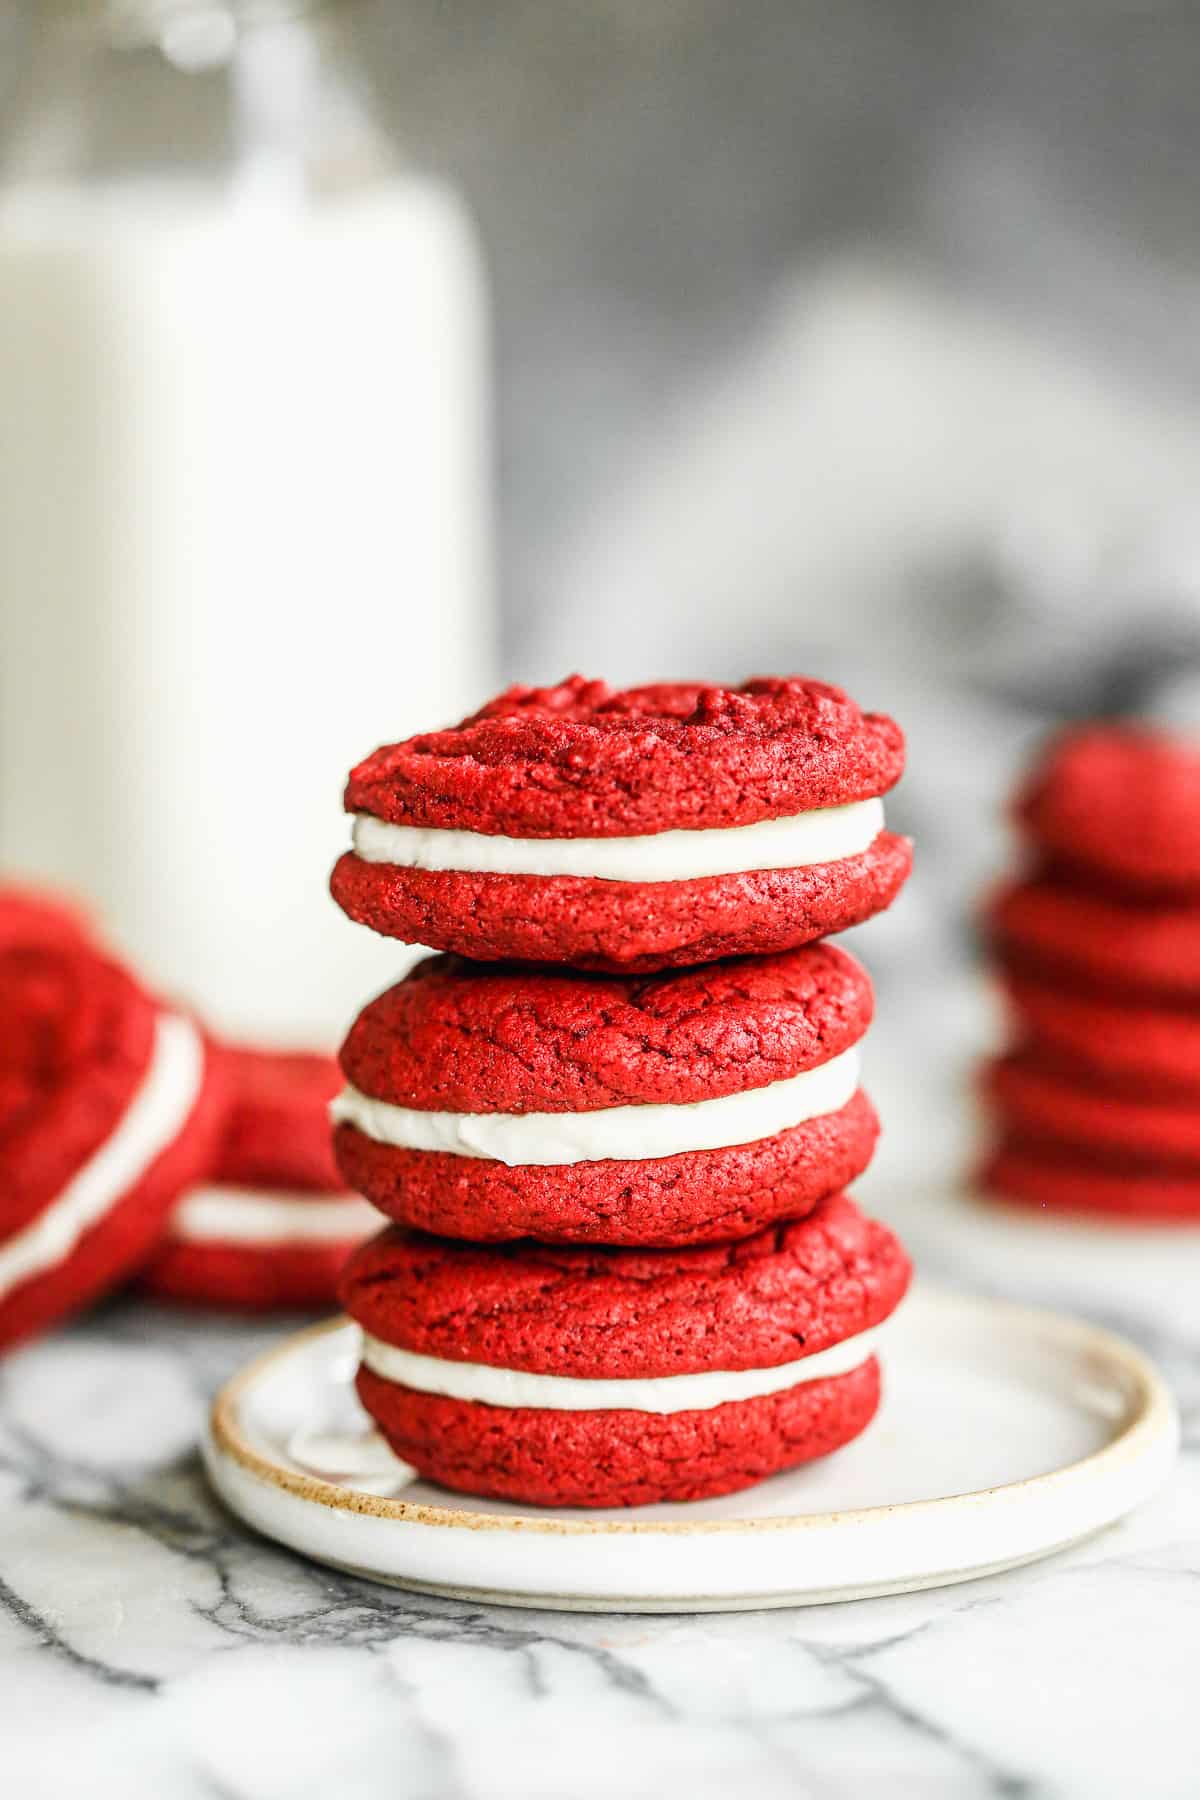 Three homemade red velvet cookies with cream cheese filling stacked on top of each other on a small plate.